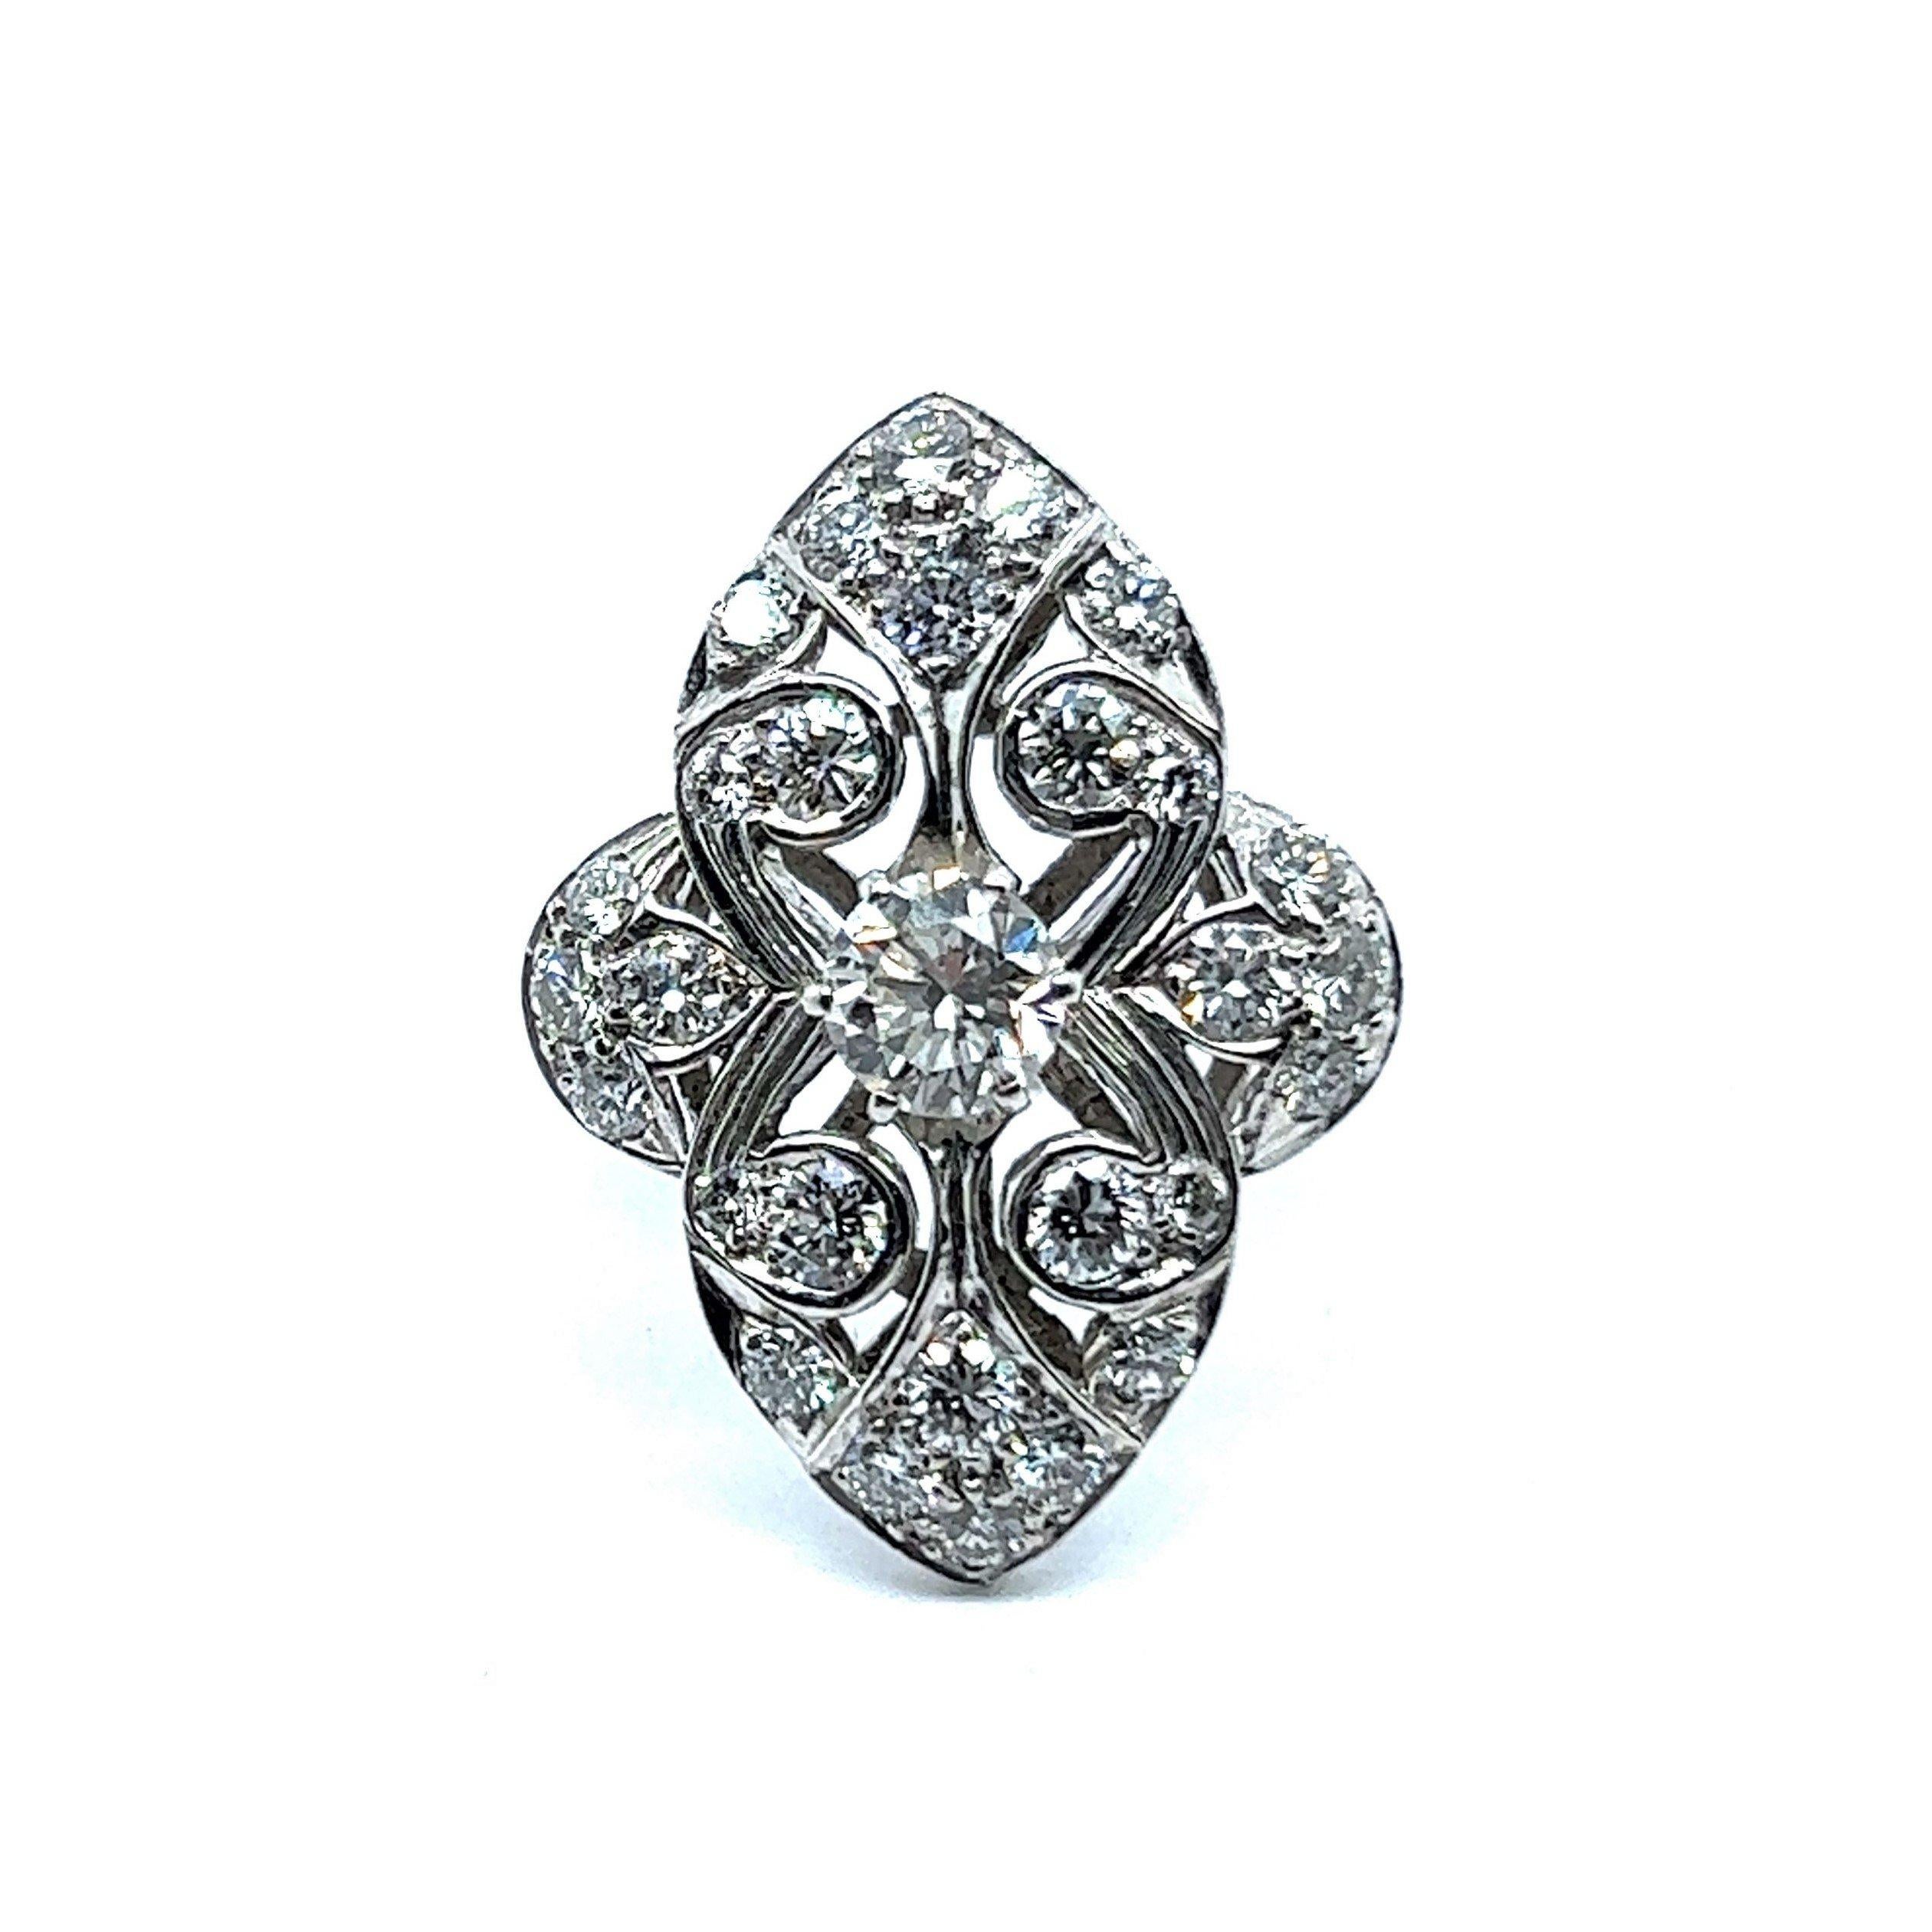 A delicate piece, a fantasy with a floral motif, this ring is the perfect embodiment of sophistication and symmetry. 

The composition attracts by its unusual materials combination - finest sterling silver merges with 28 brilliants of G-H colour and